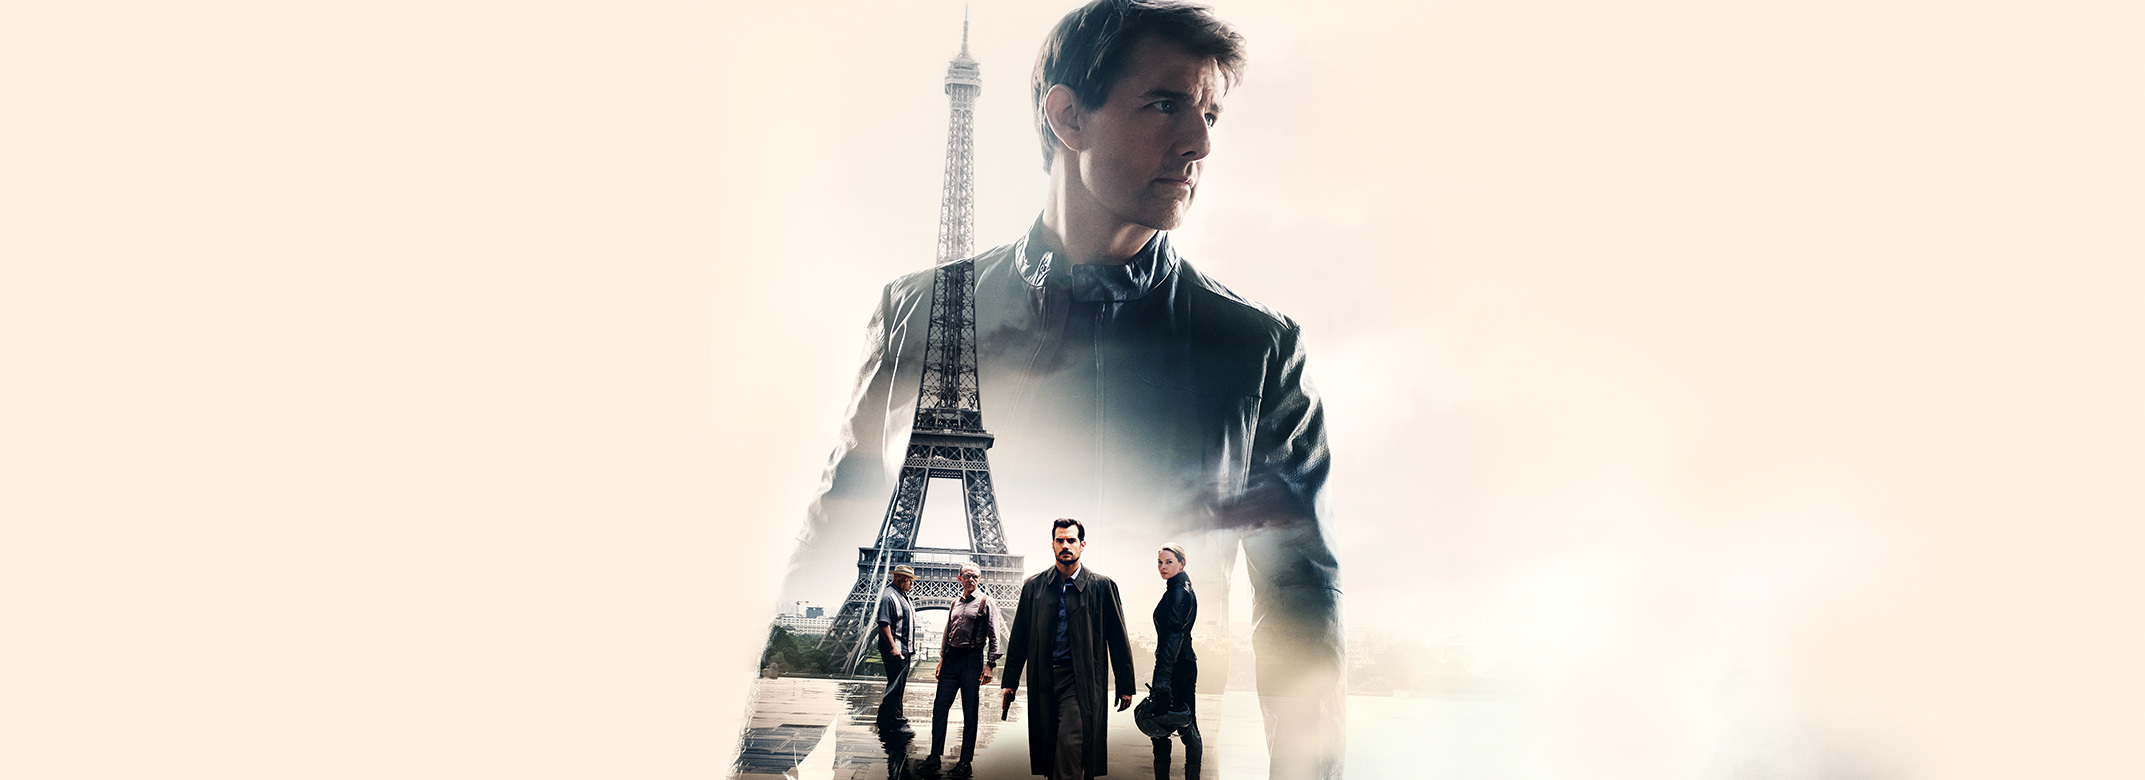 Image result for mission impossible fallout banner